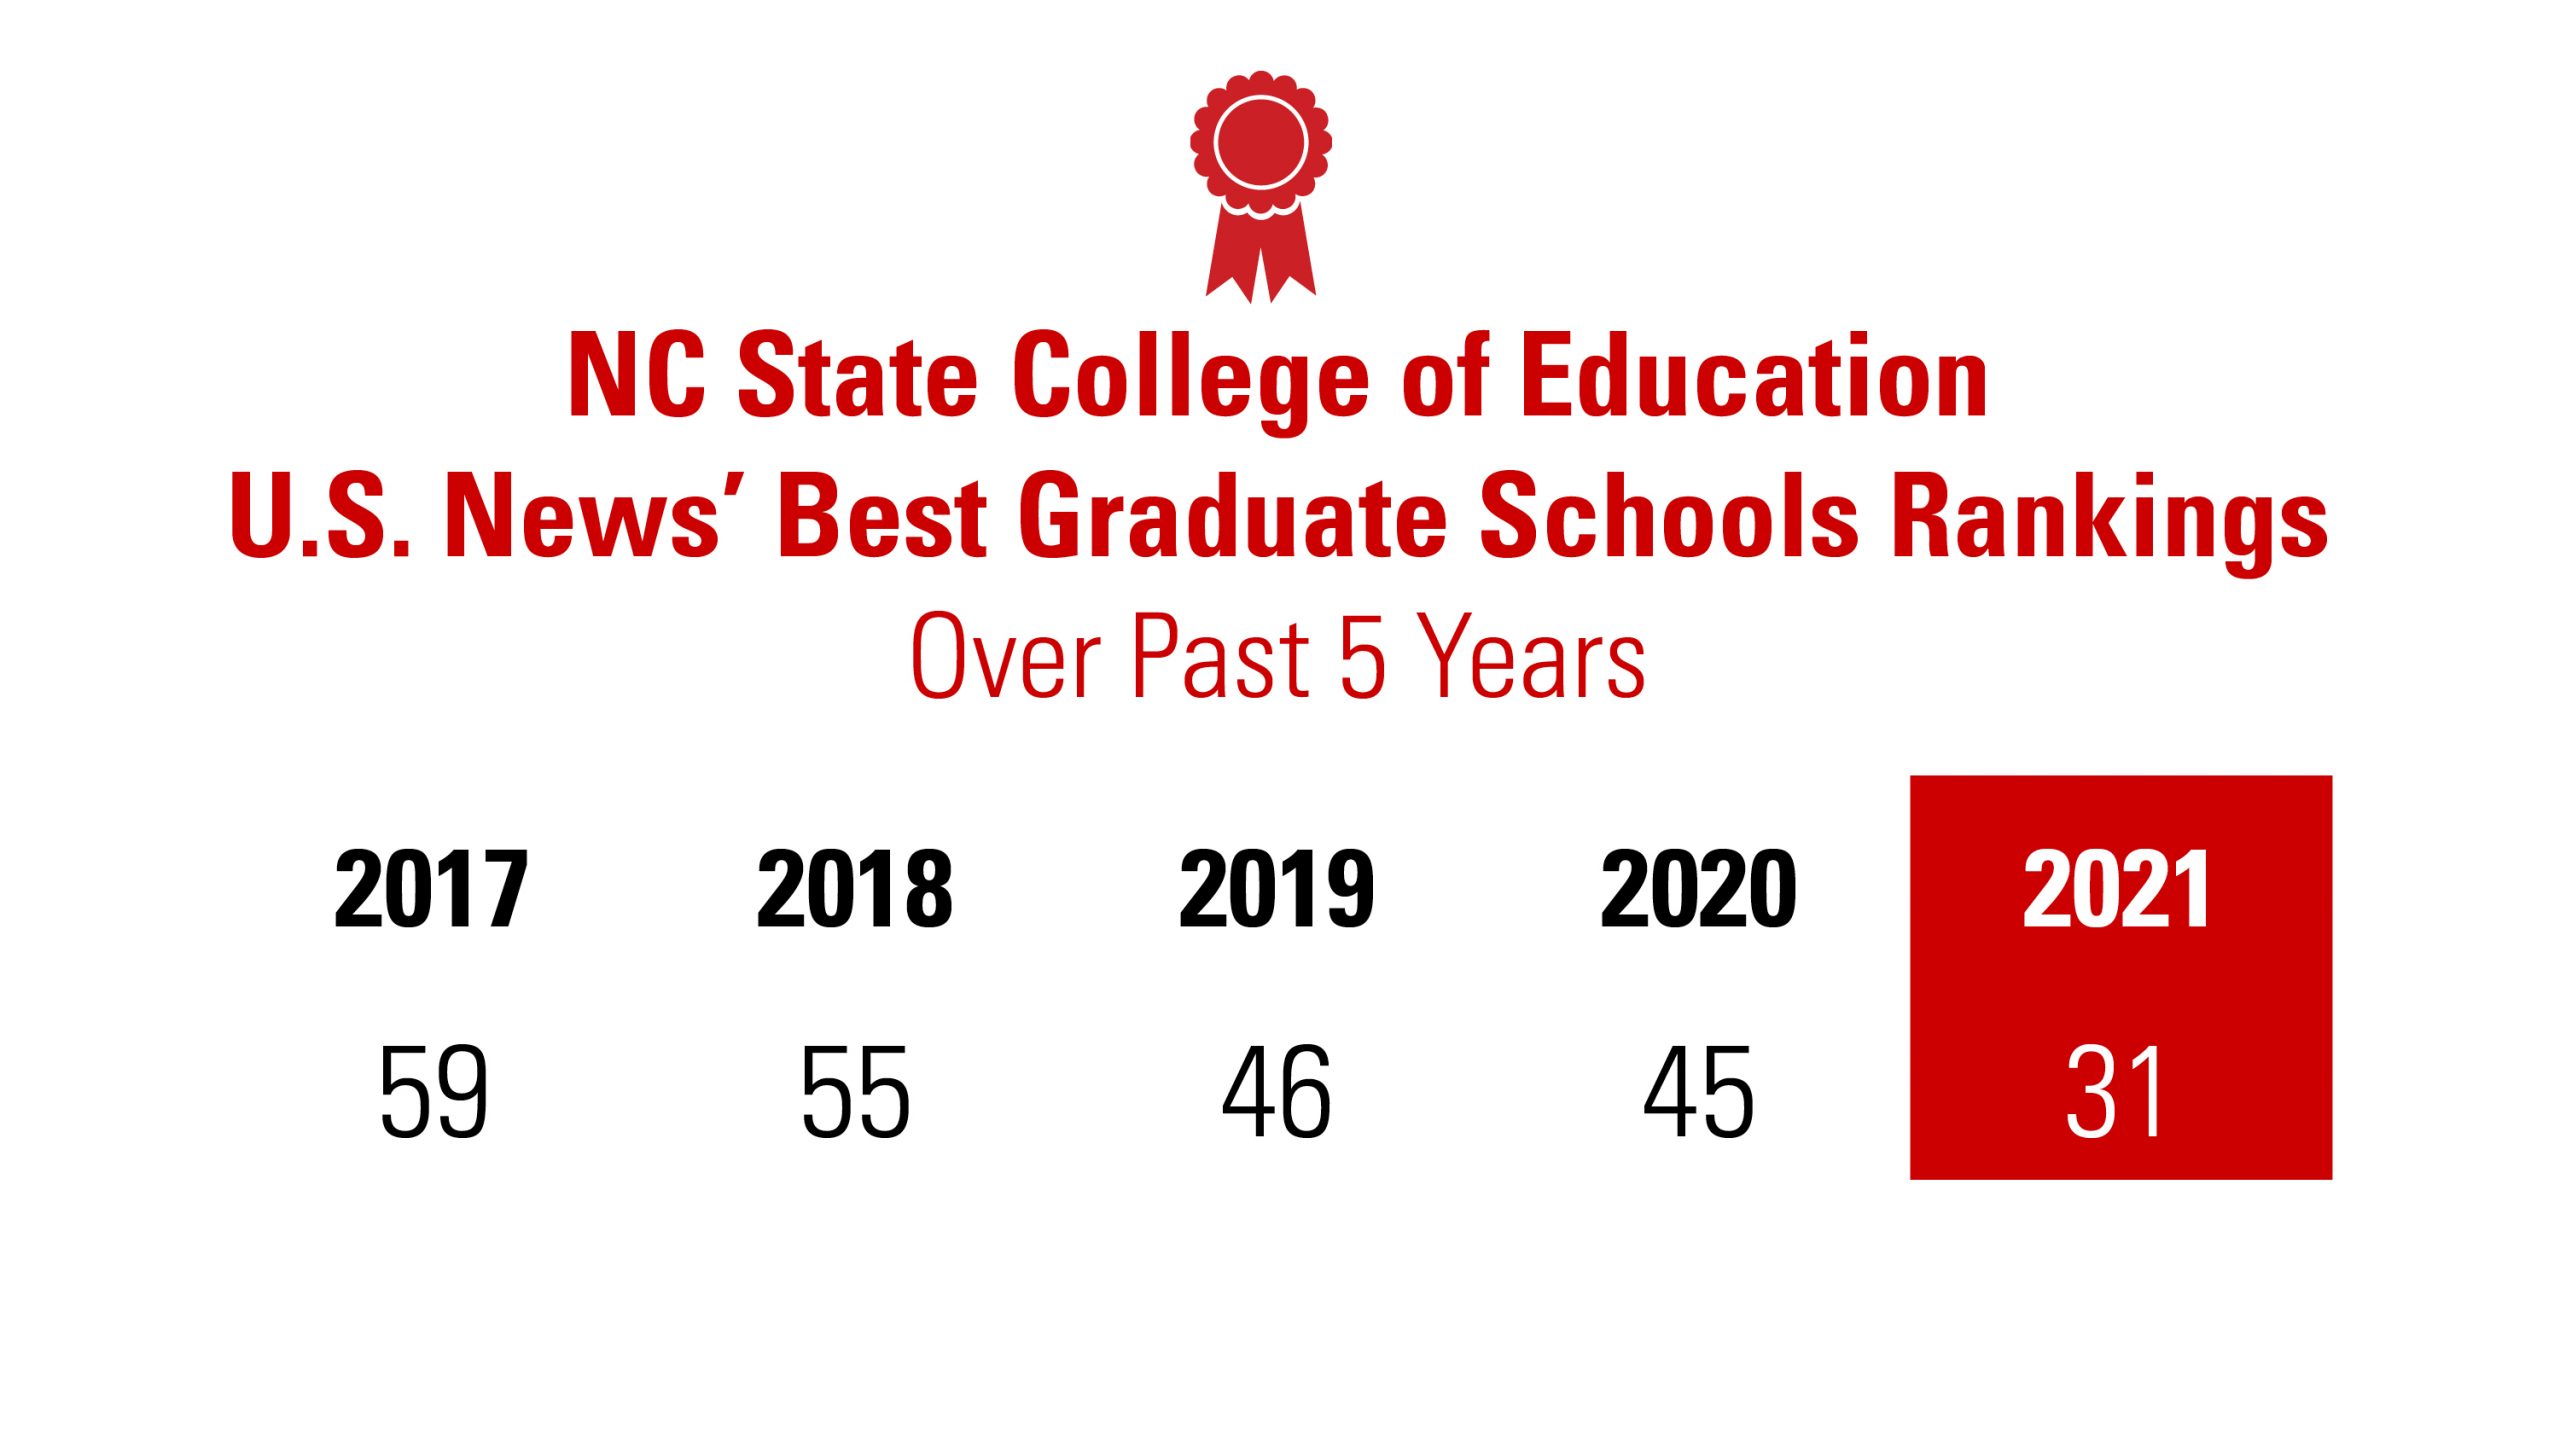 Us News Best States 2021 U.S. News Ranks NC State College of Education #31 in Nation, 5 